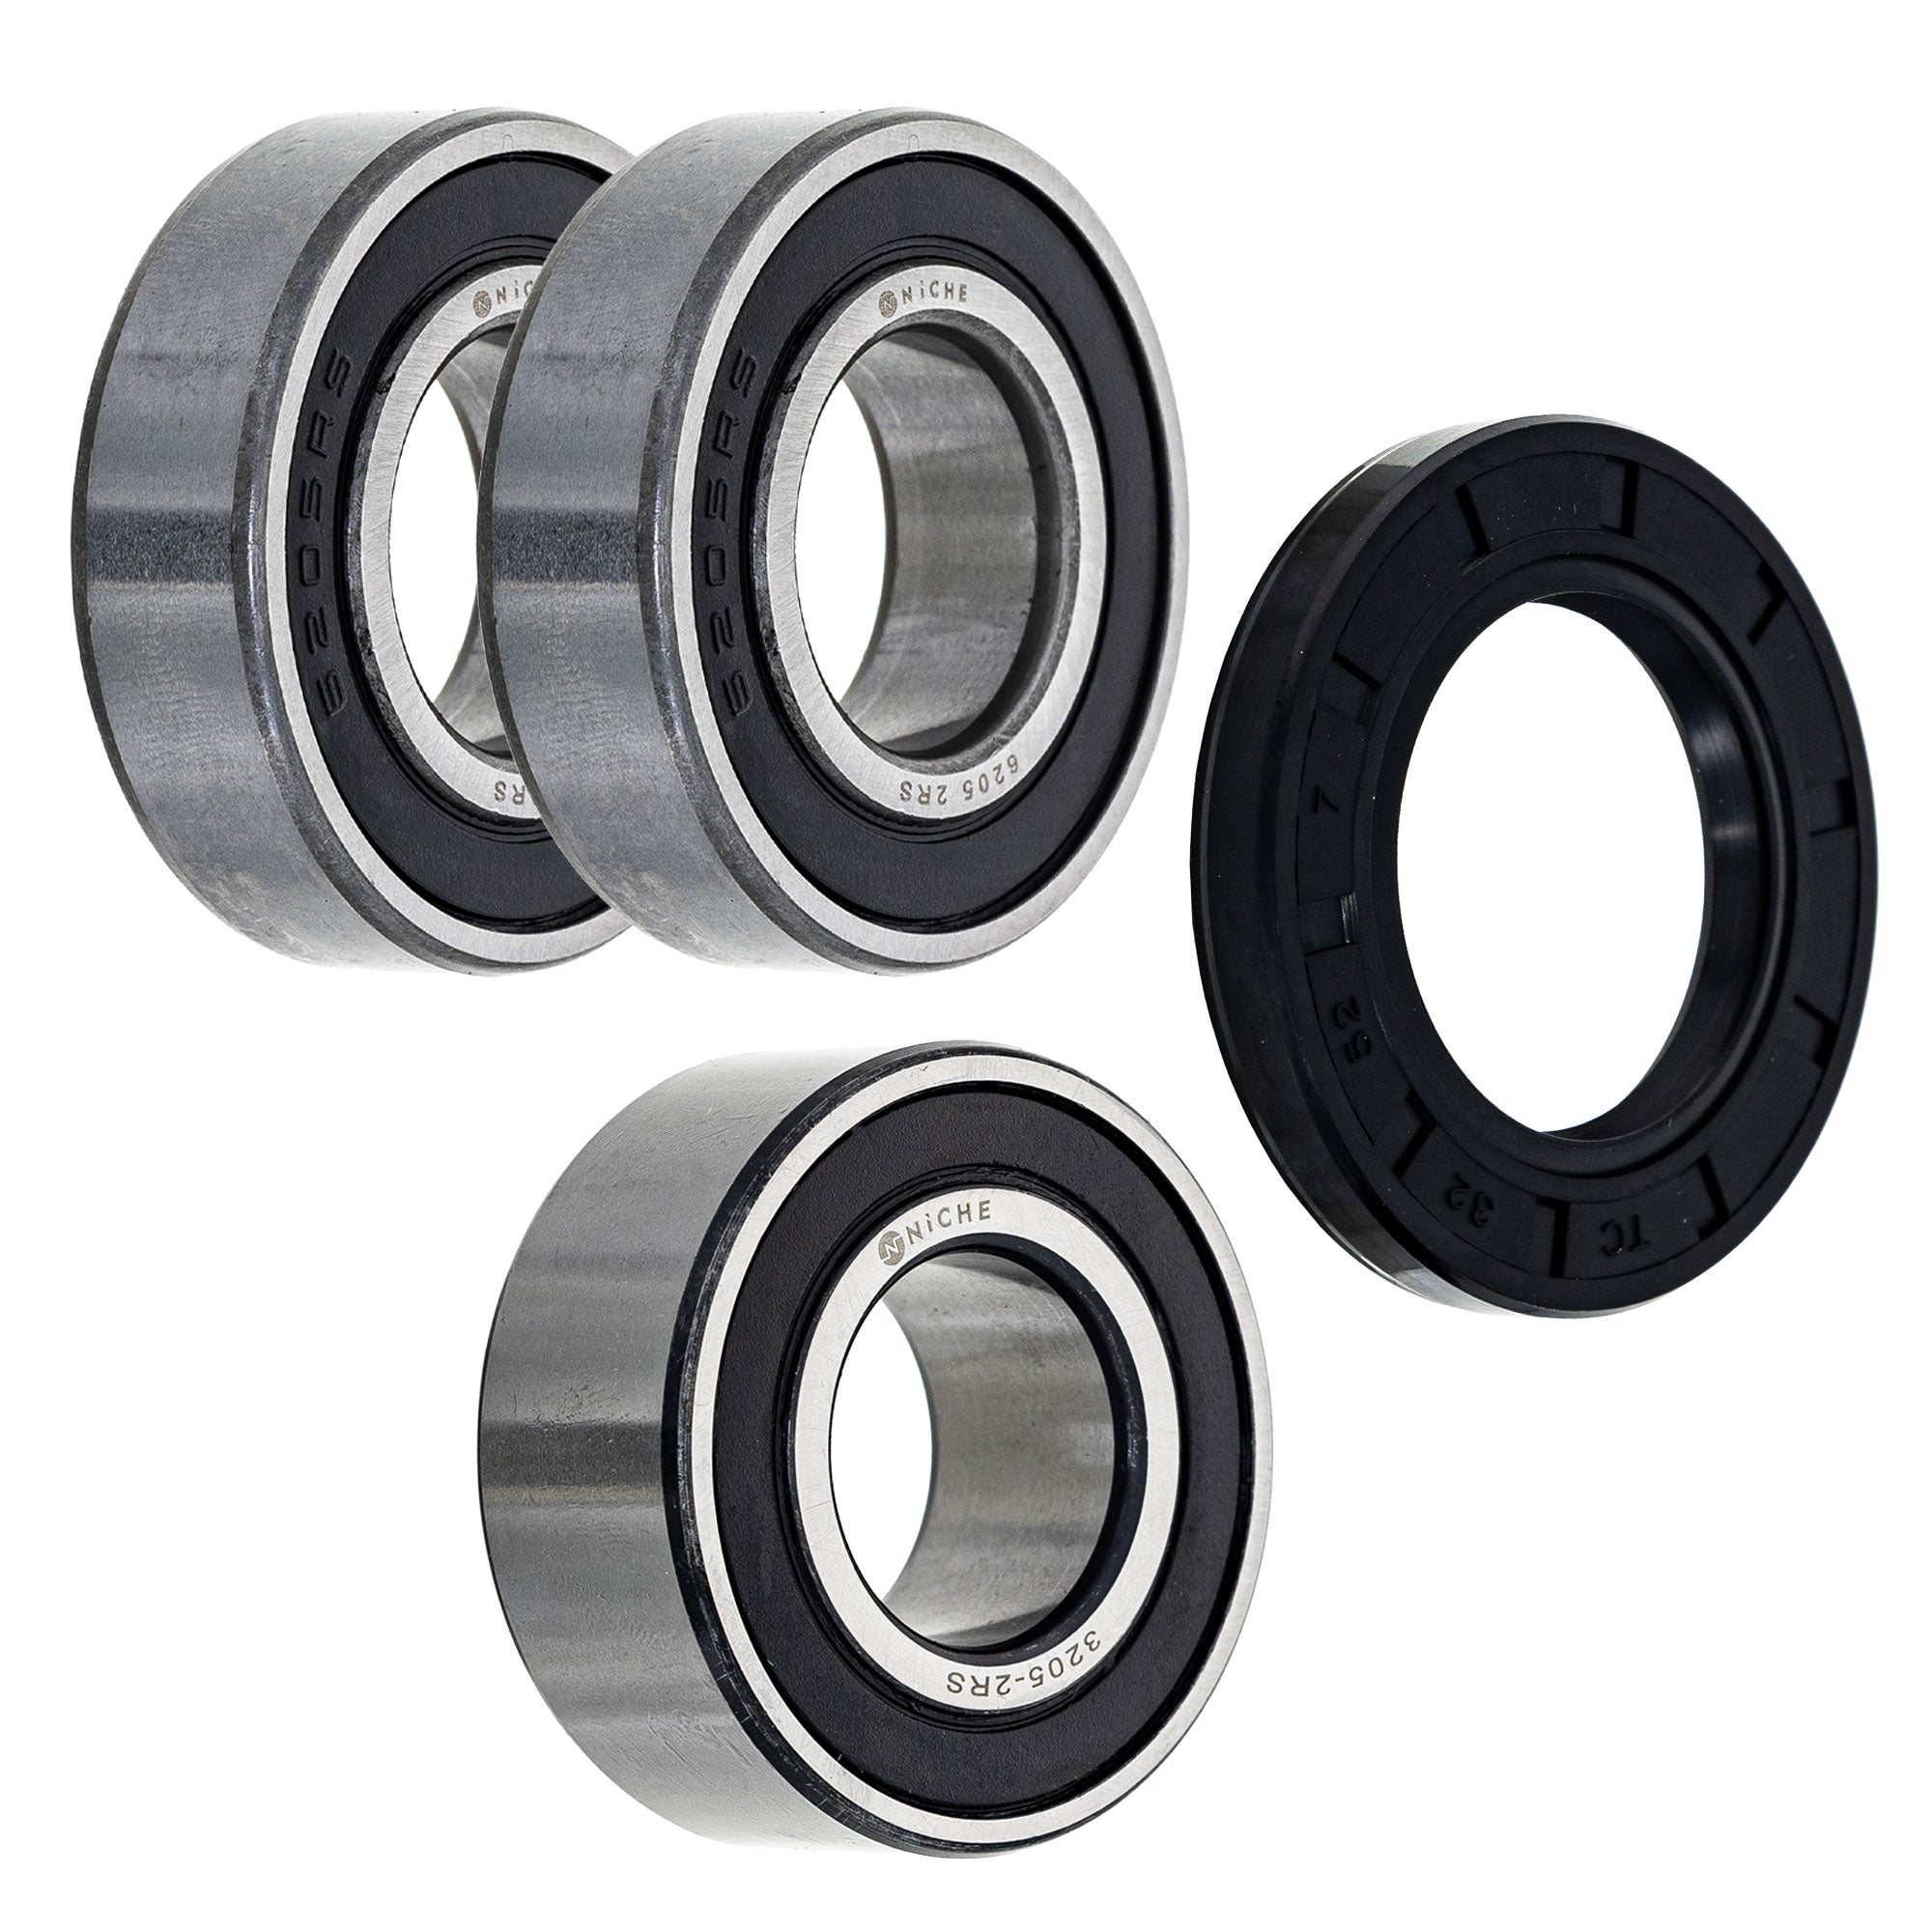 Wheel Bearing Seal Kit for zOTHER Ref No 640 620 400 350 NICHE MK1009022